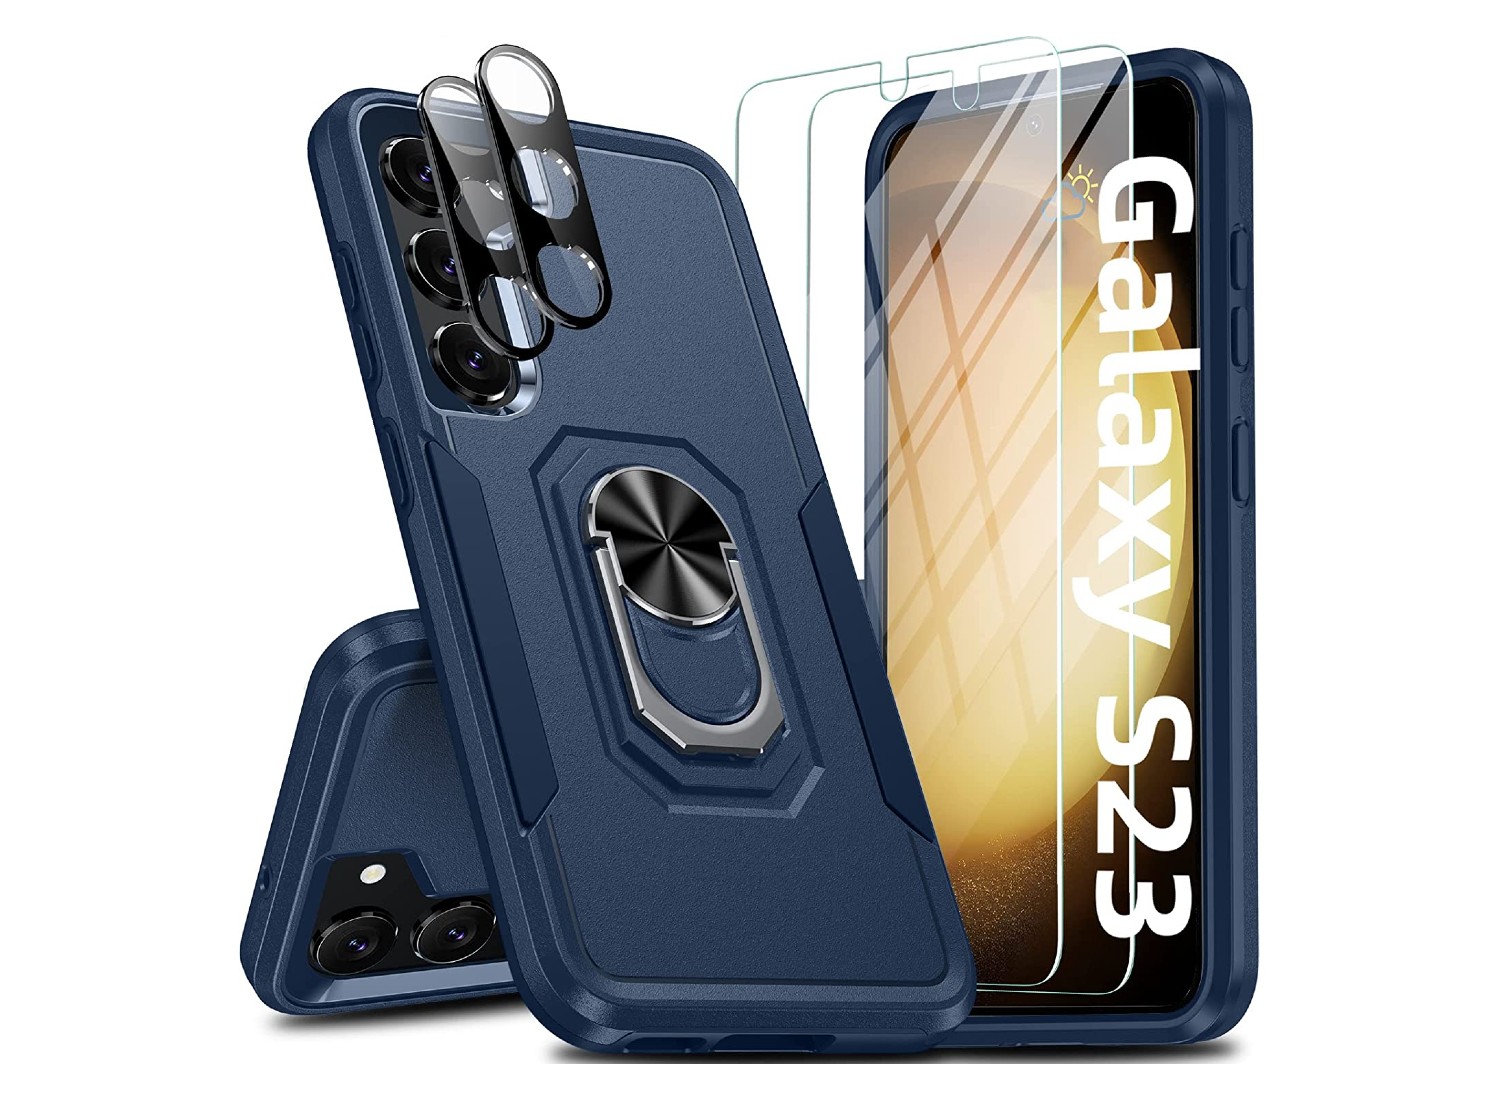 Simtect 【𝟐𝟎𝟐𝟐 𝐔𝐩𝐠𝐫𝐚𝐝𝐞𝐝】 for Samsung Galaxy S22 Ultra Case with  Camera Cover [Protective & Slim Fit] Slide Camera Cover Protection for  Samsung Galaxy